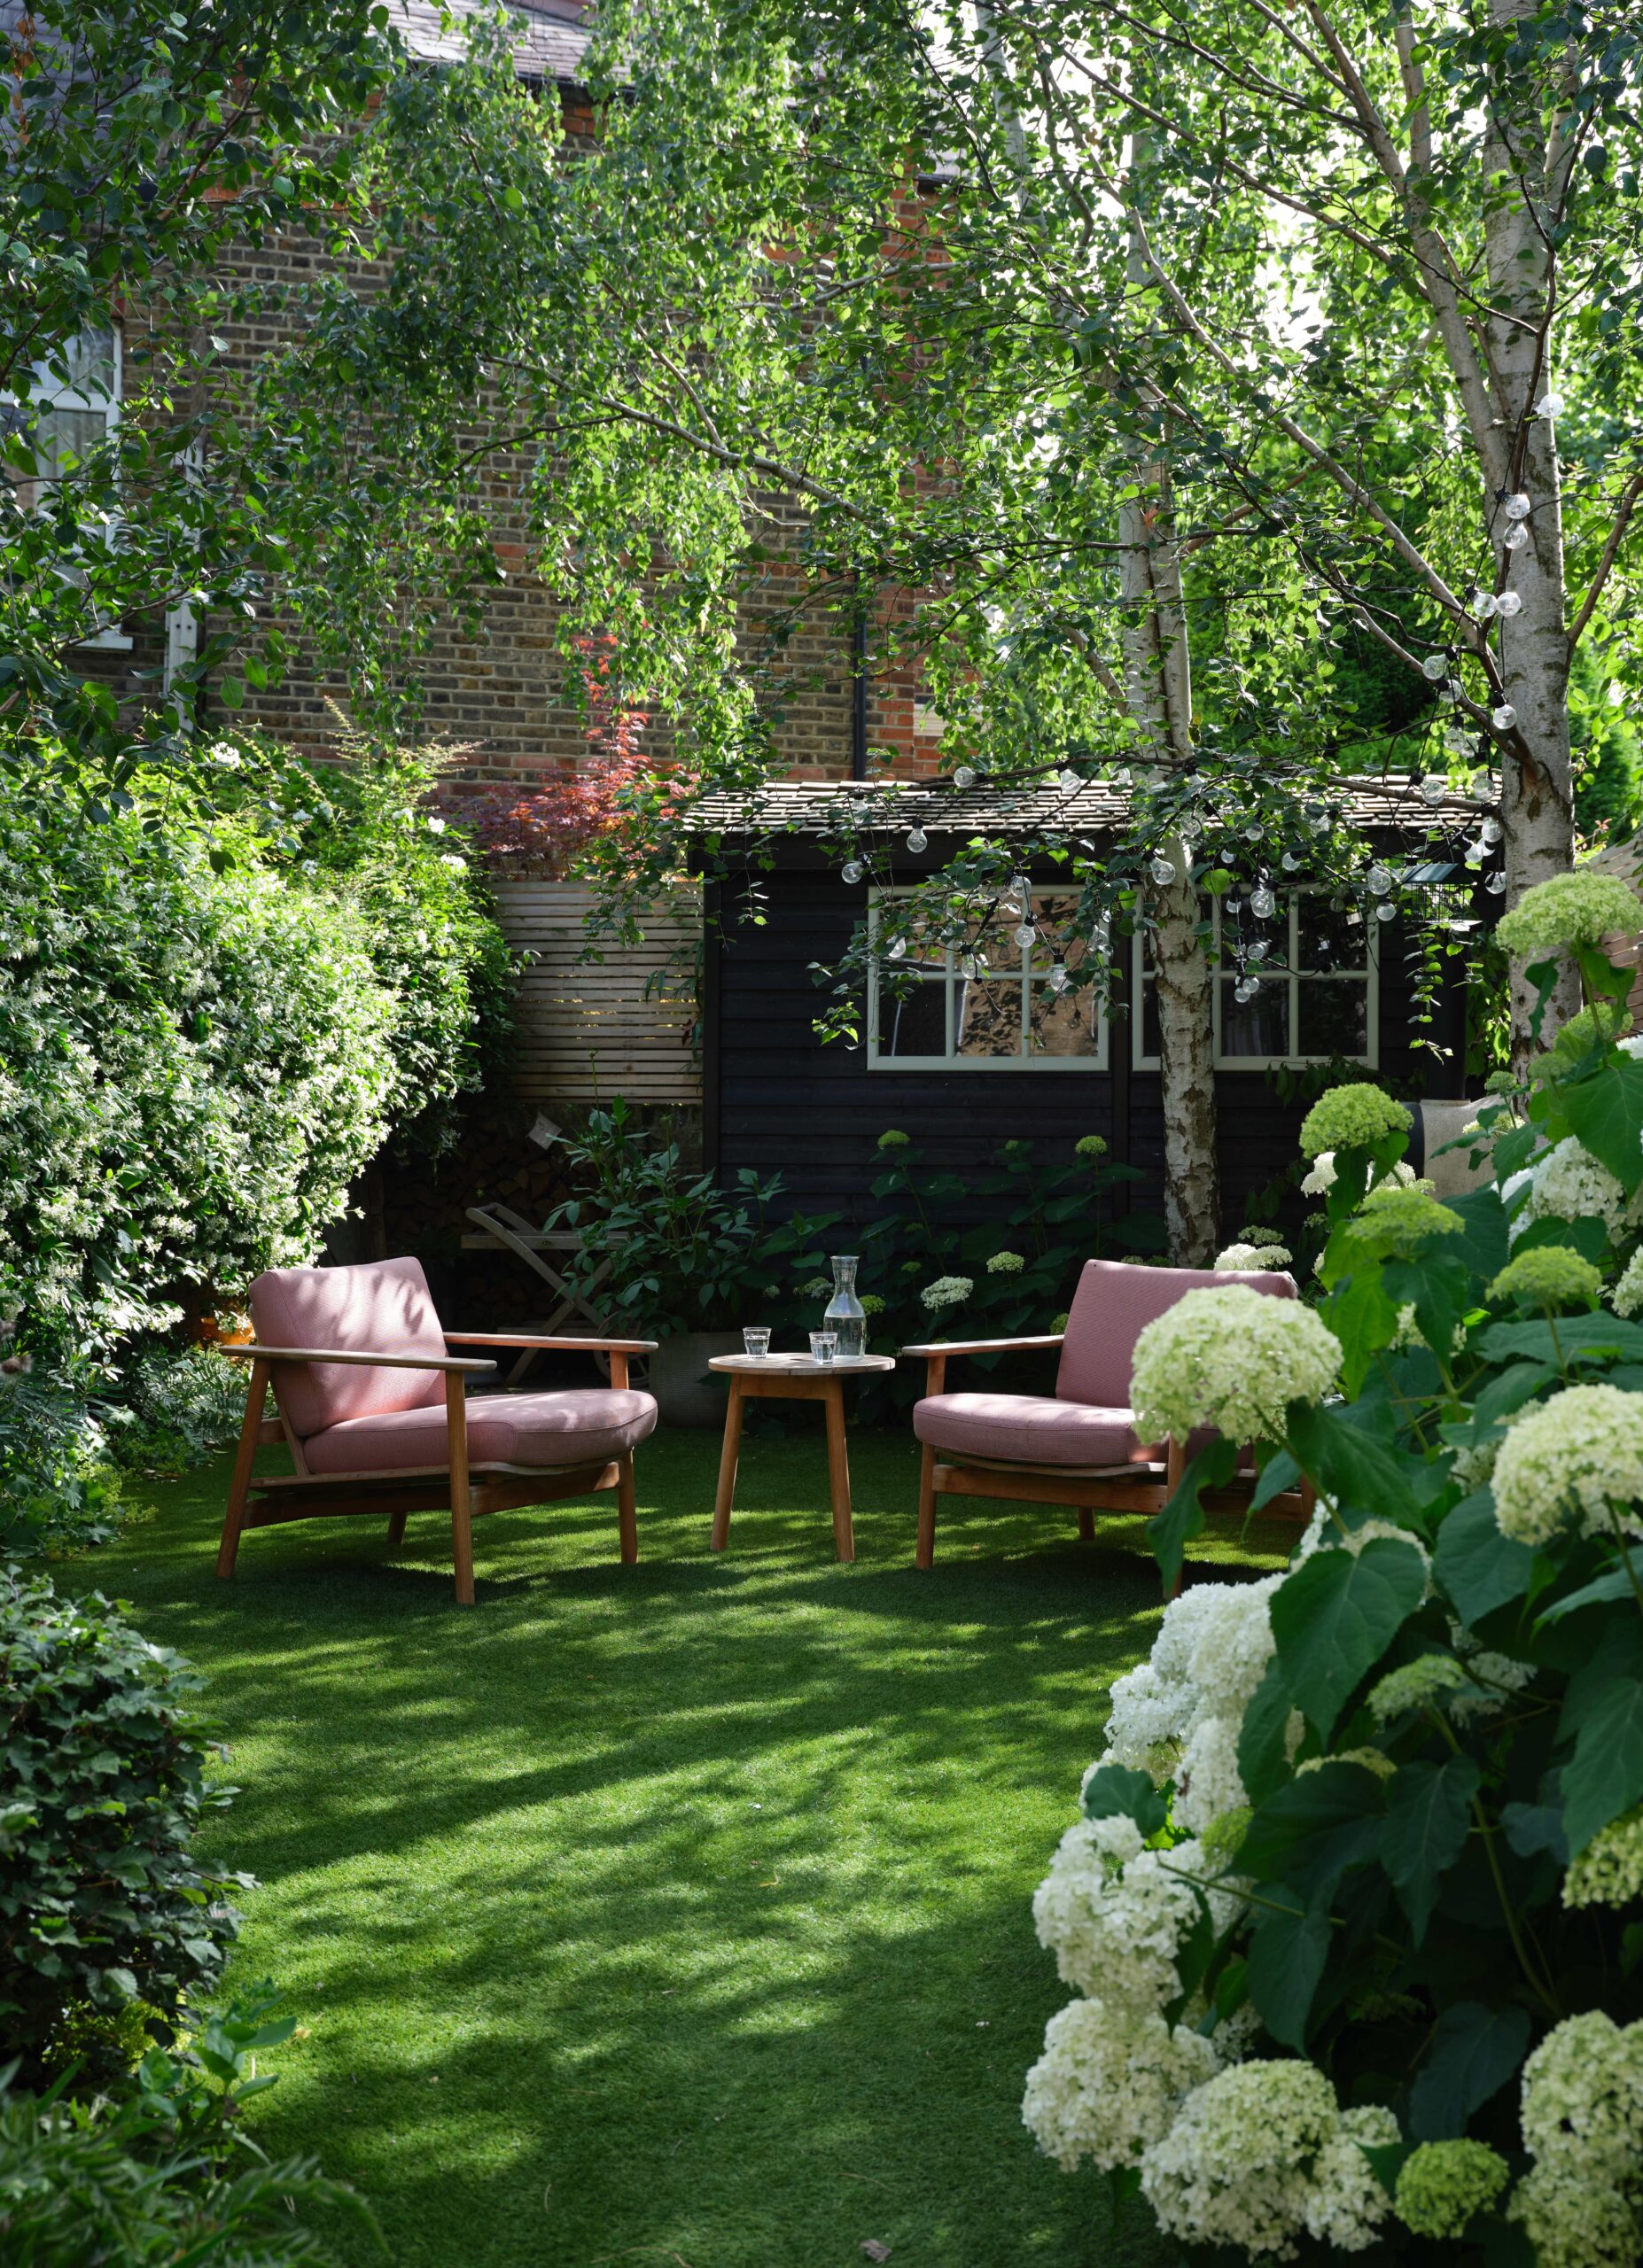 Creating a Cozy and Efficient Garden Design: Tips for Small Outdoor Spaces